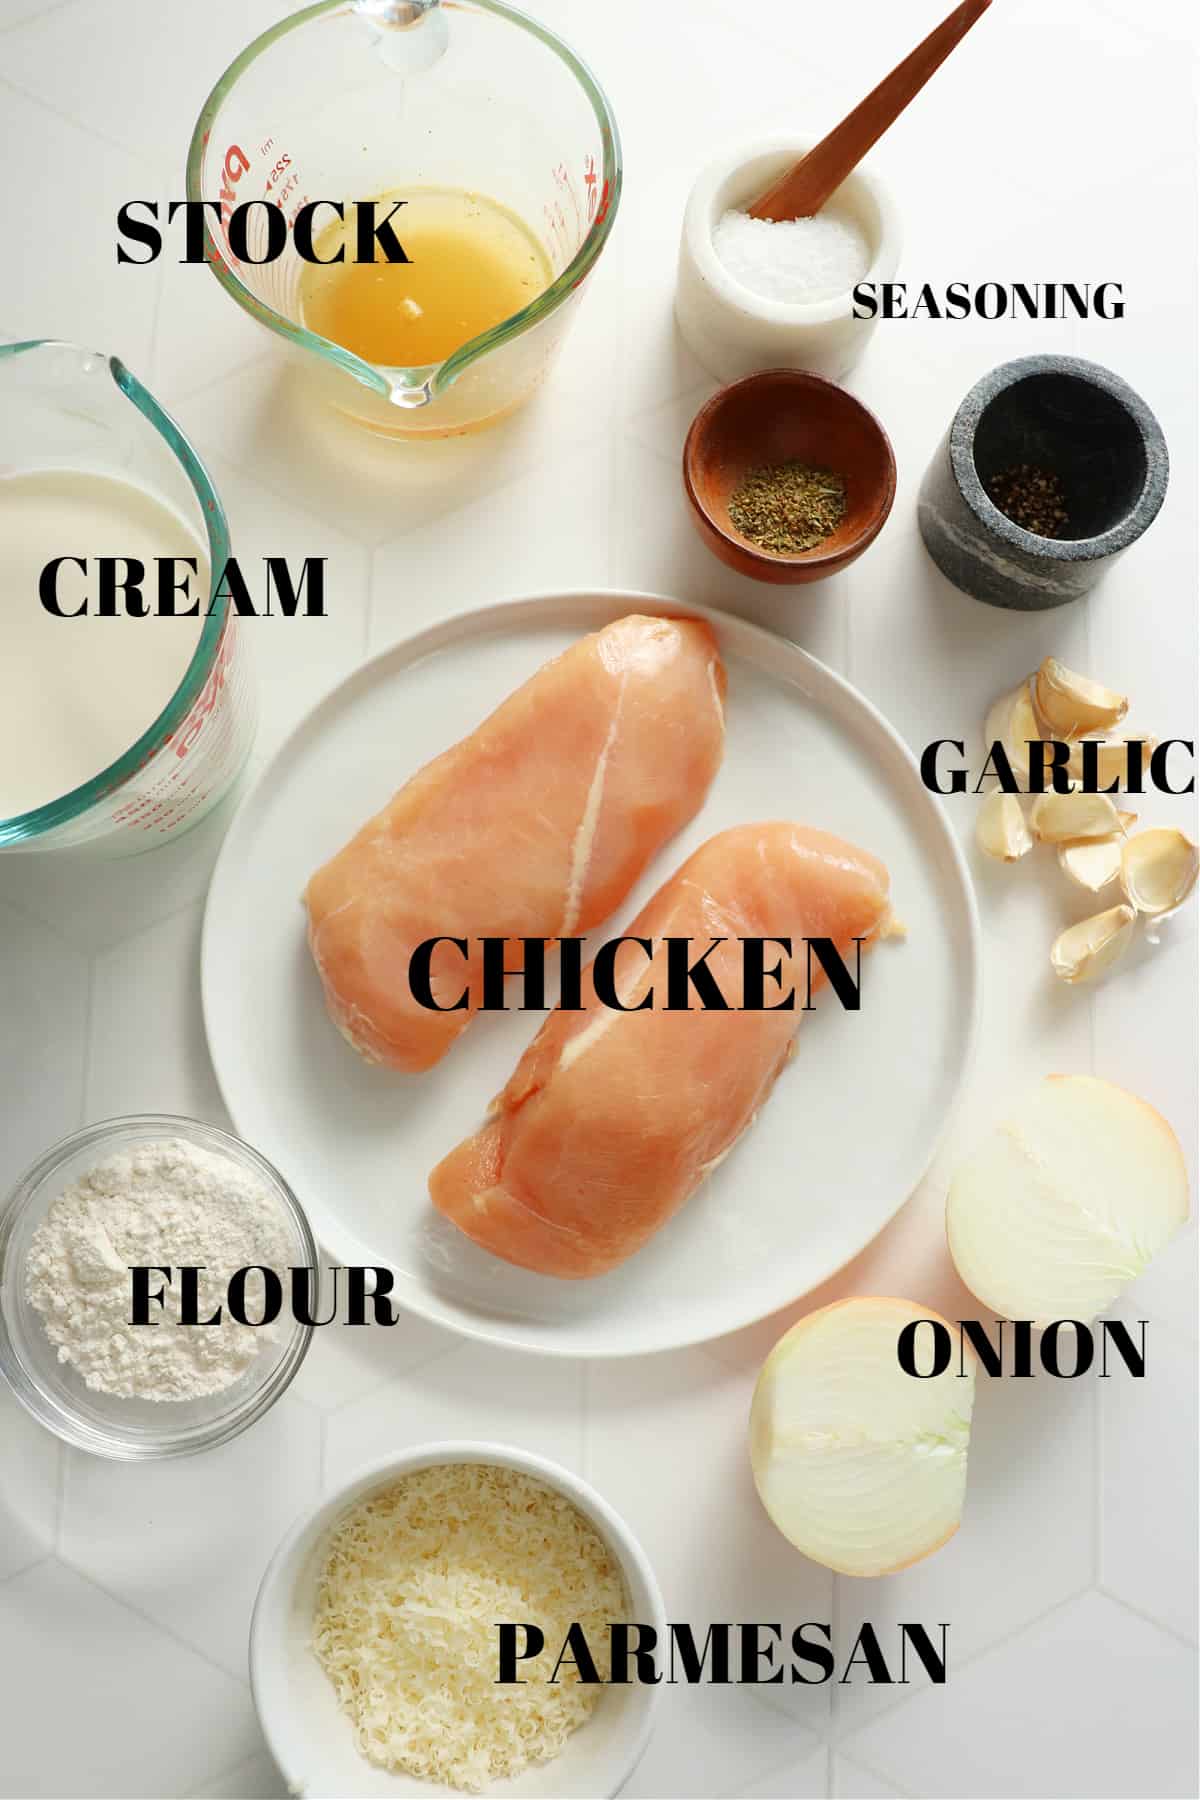 Ingredients for creamy garlic chicken dish on a white tile board.